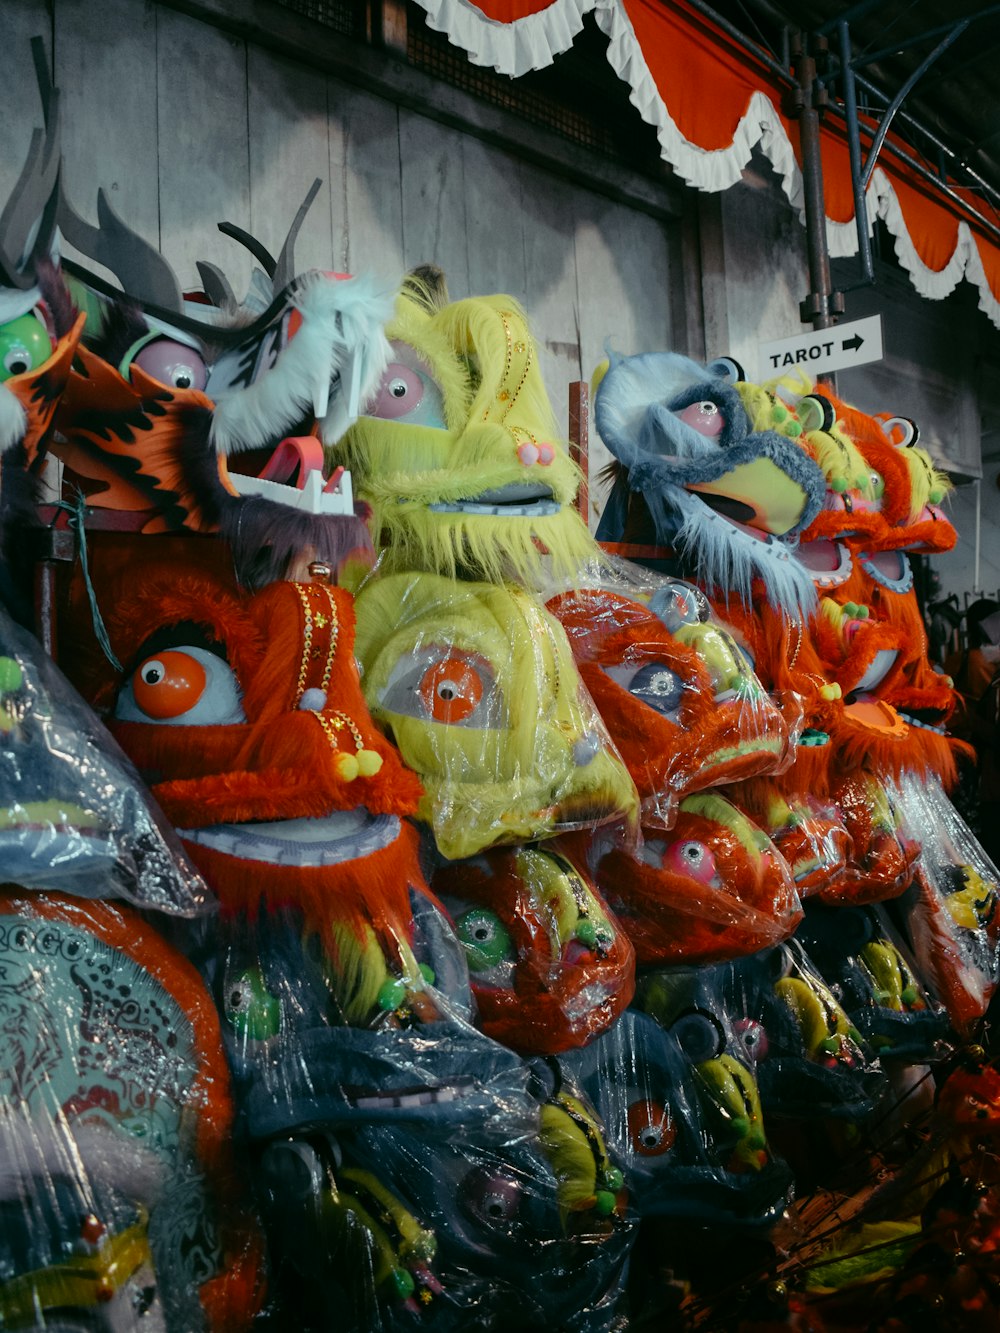 a row of colorful masks on display in a store